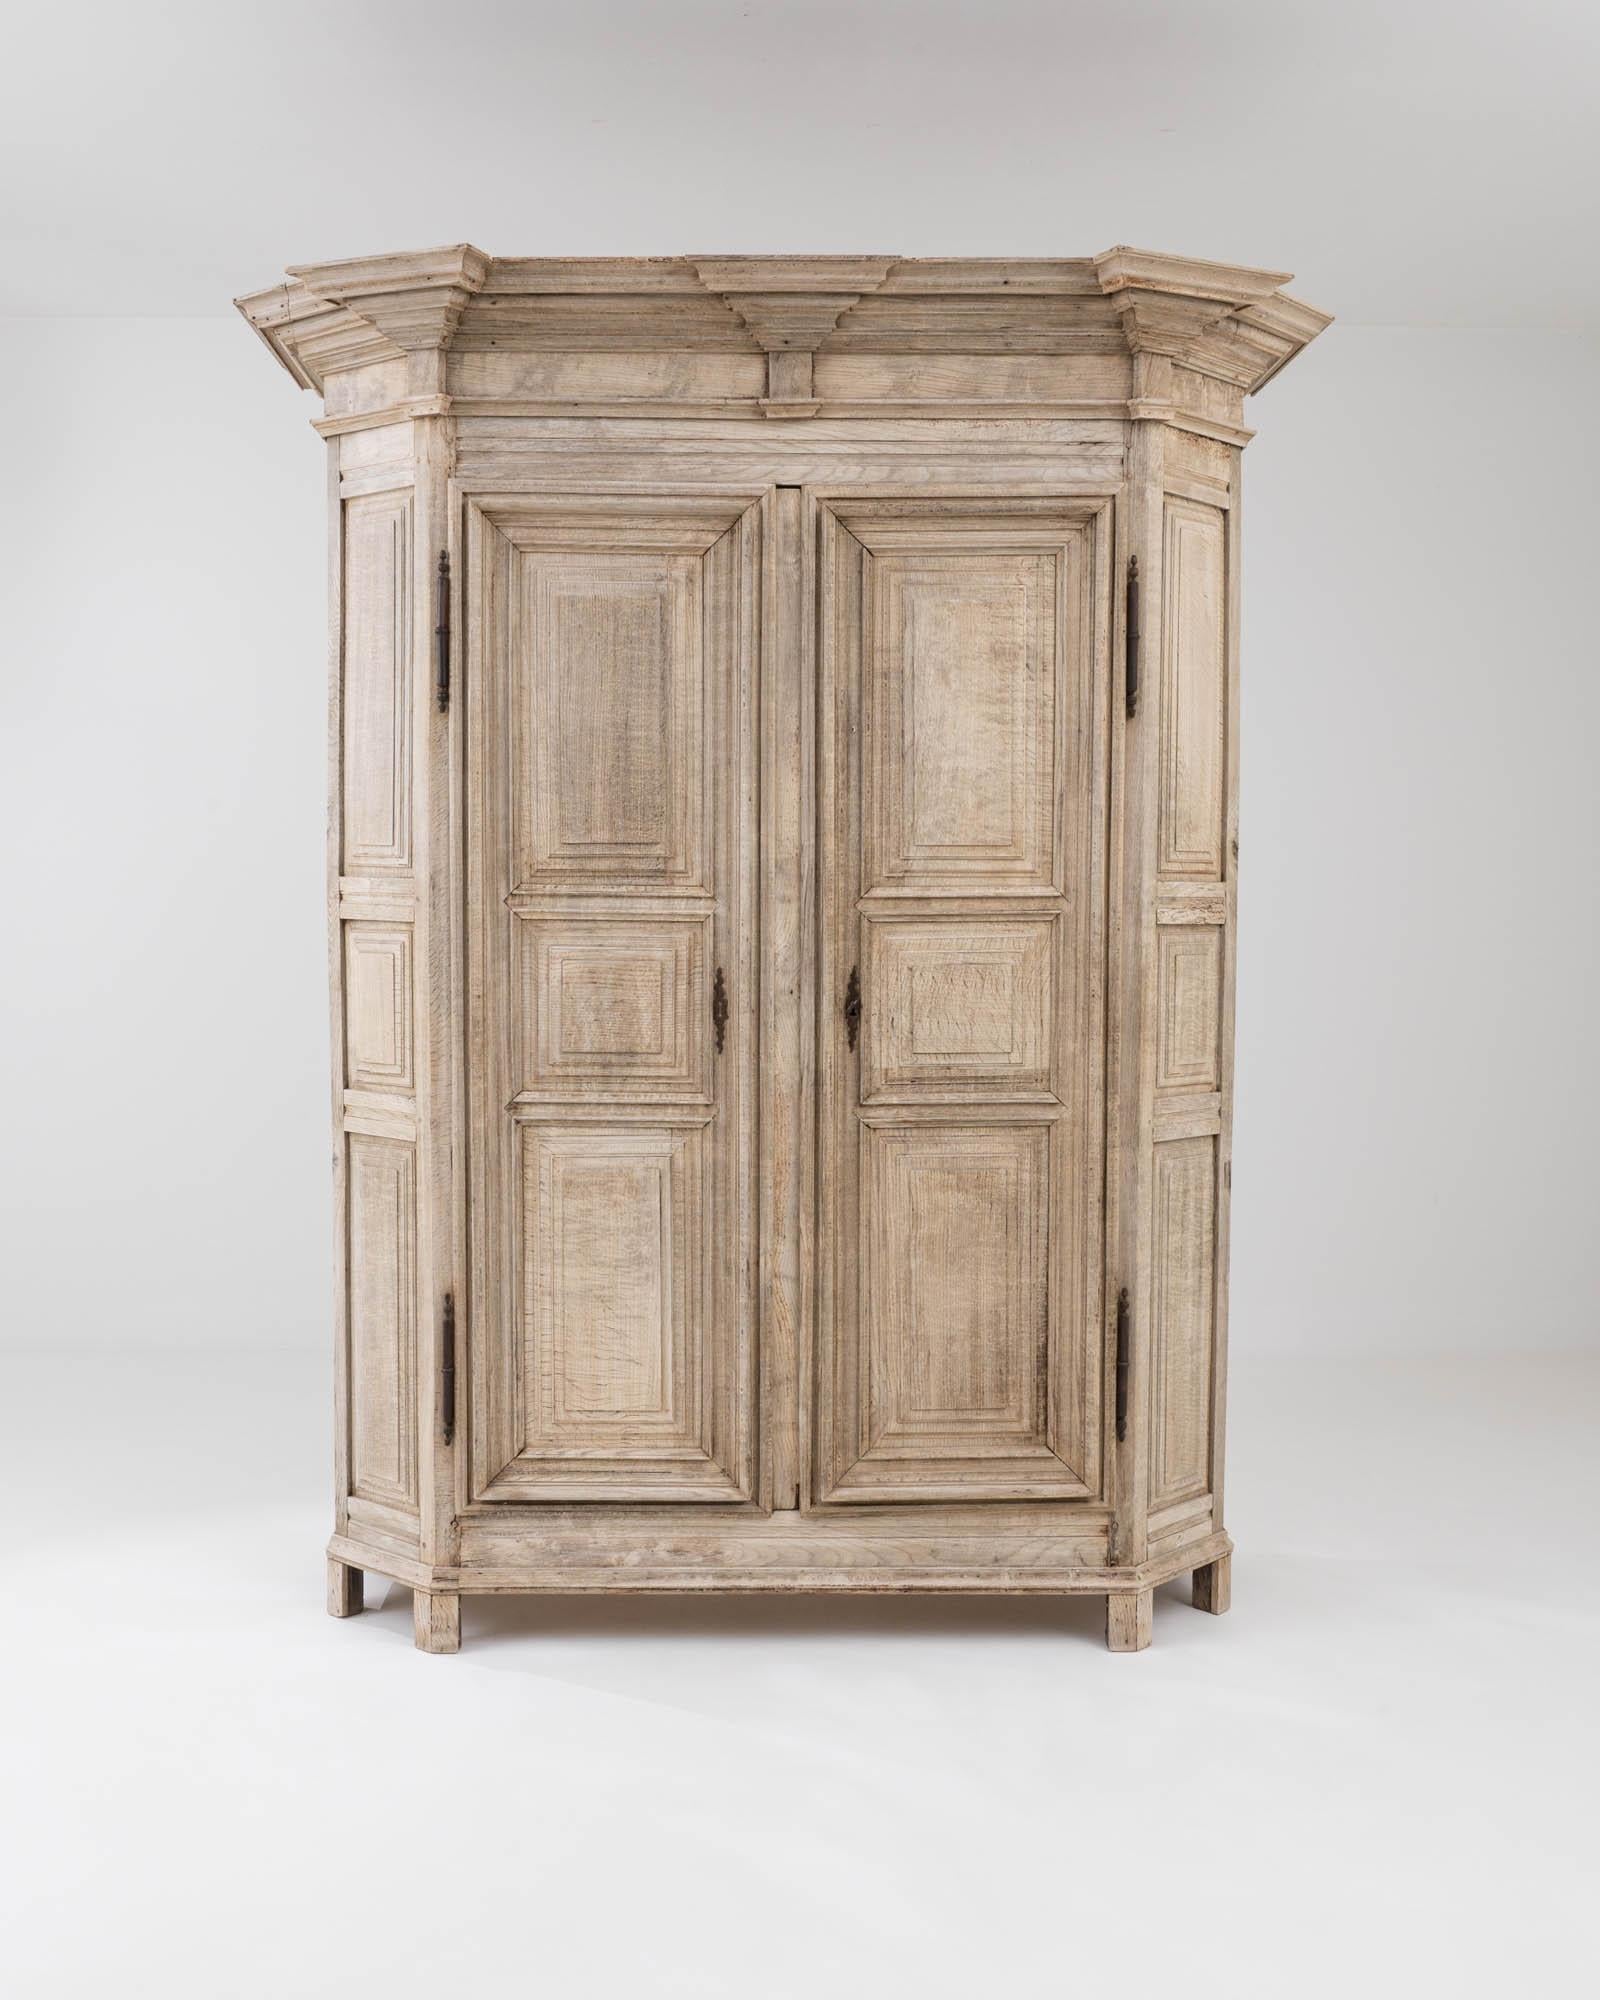 Elegant, eye-catching and beautifully crafted, this antique oak armoire casts an enchanting spell. Made in Belgium in the early 19th Century, the design combines a dramatic silhouette with delicate carved detail. An impressive crown molding